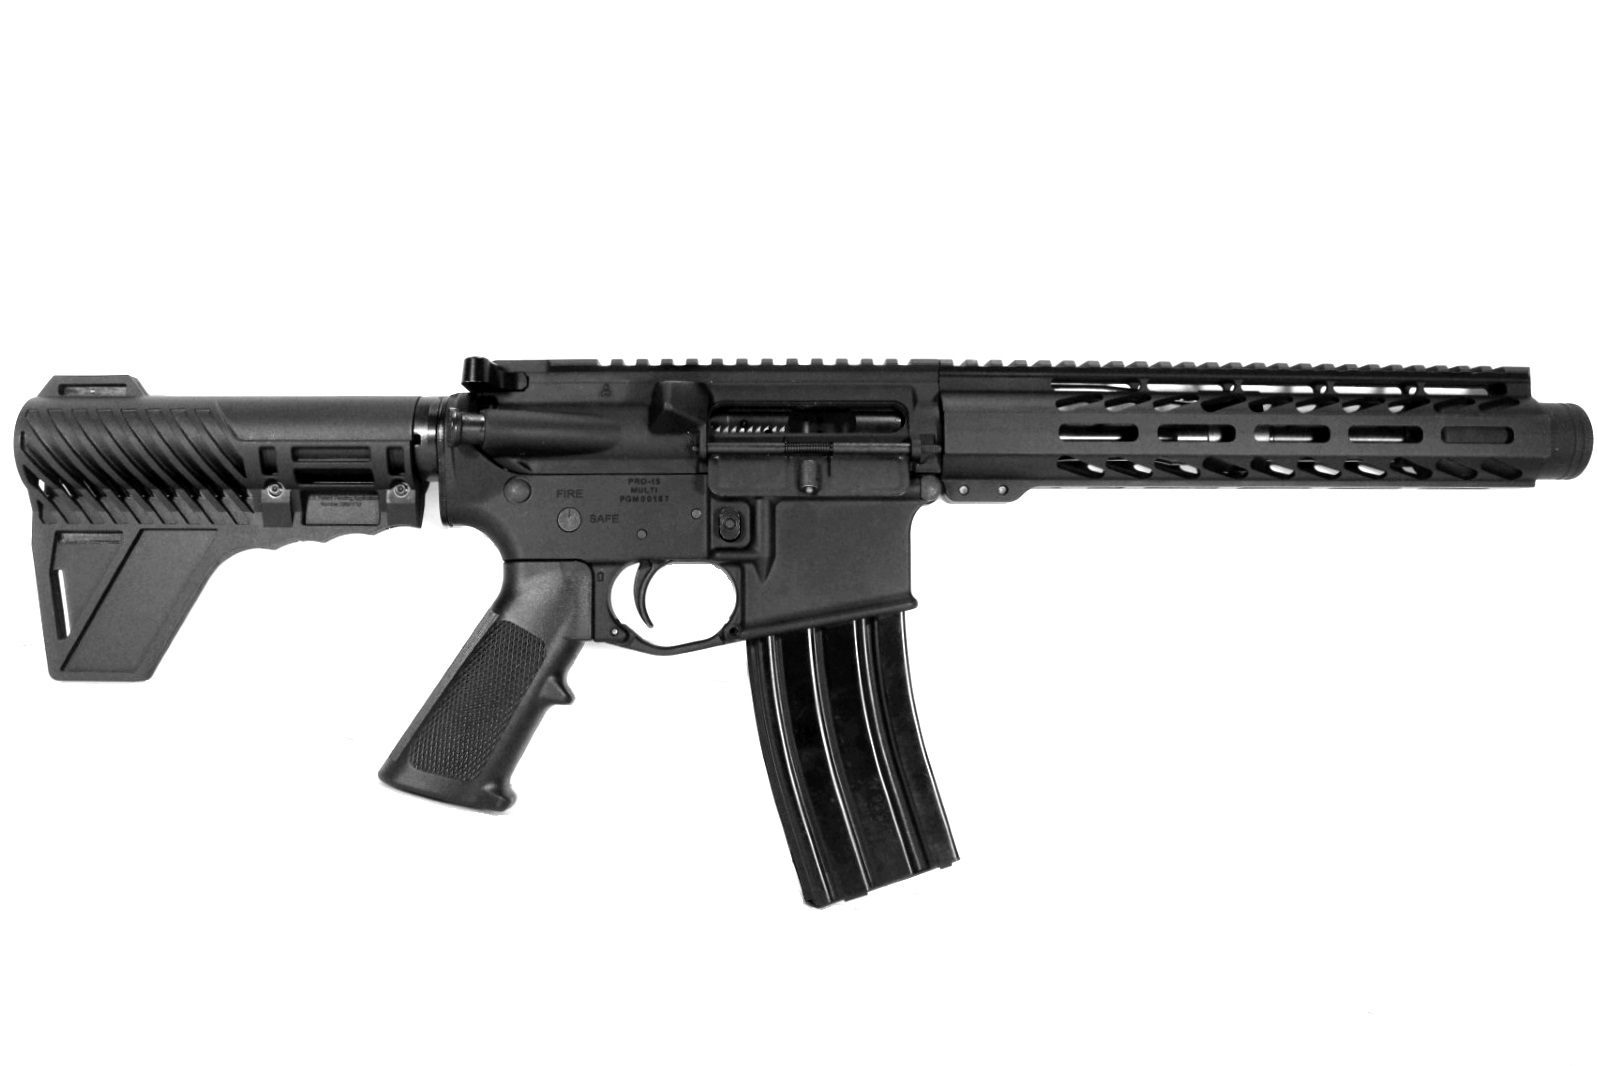 8 inch 300 Blackout AR-15 Pistol | Fast Shipping | US MADE